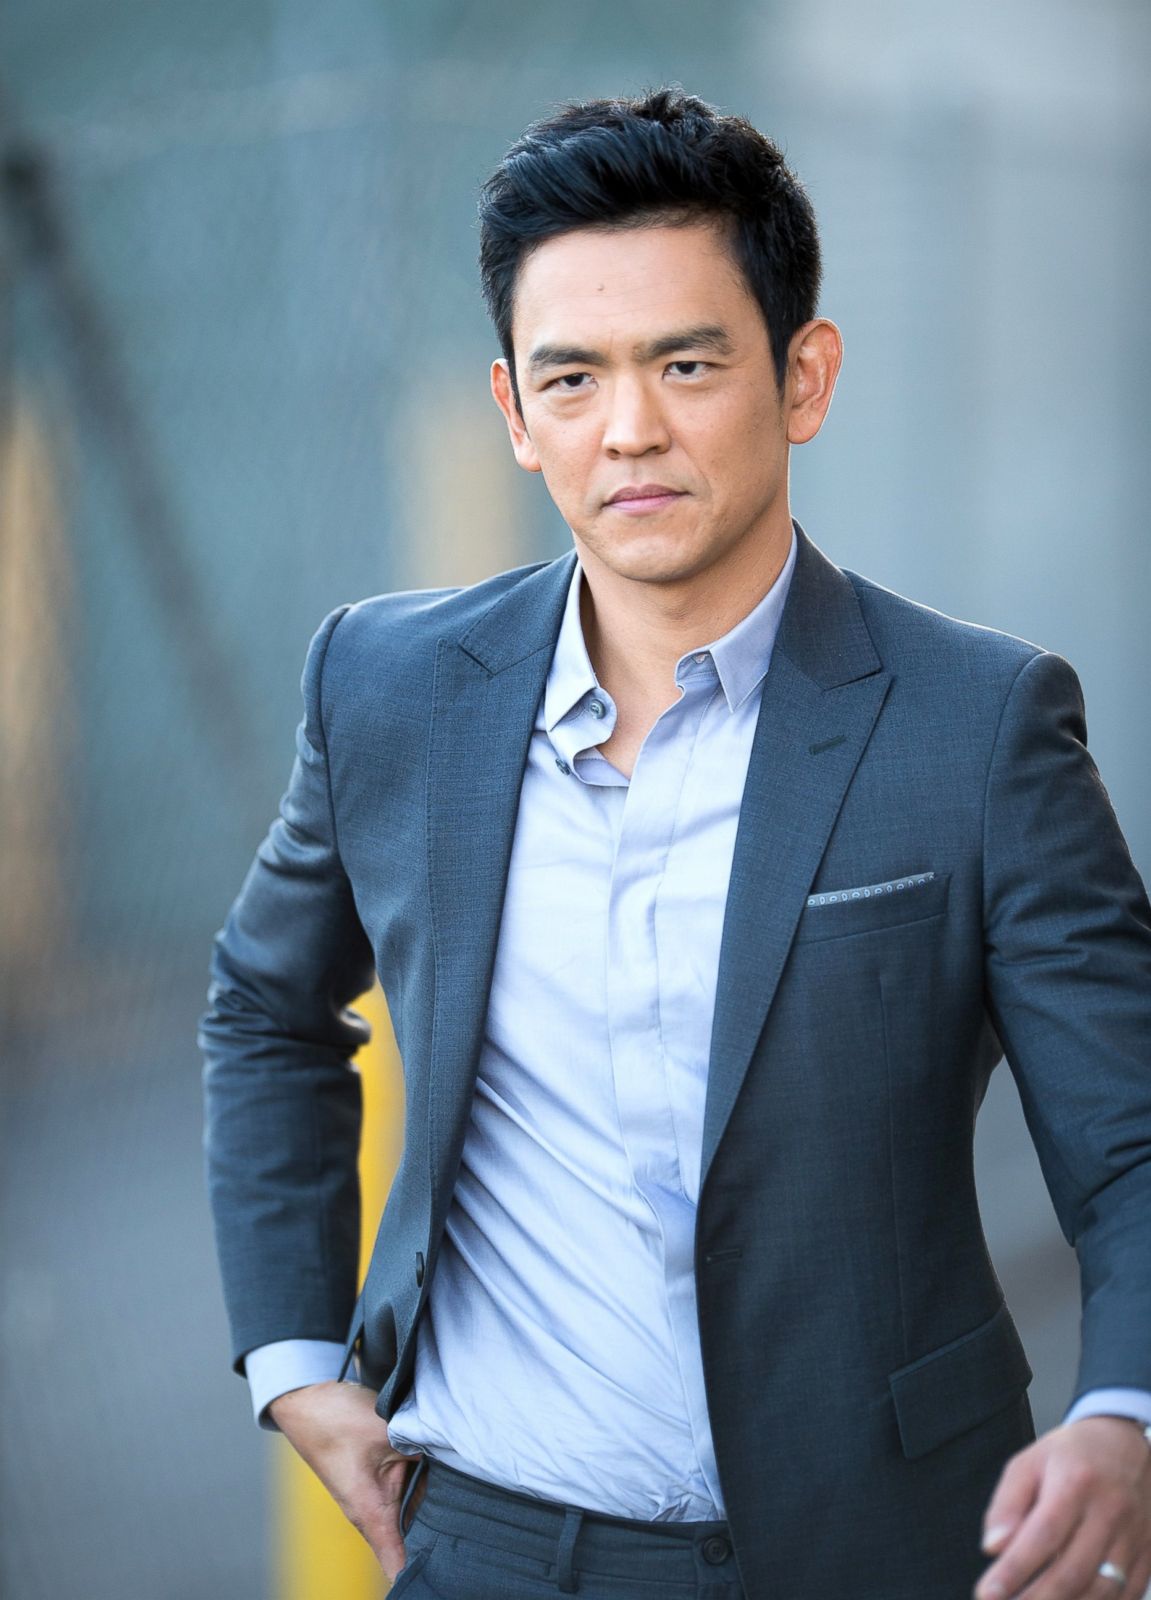 John Cho Heads To 'Kimmel' Picture | September's Top Celebrity Pictures - ABC News